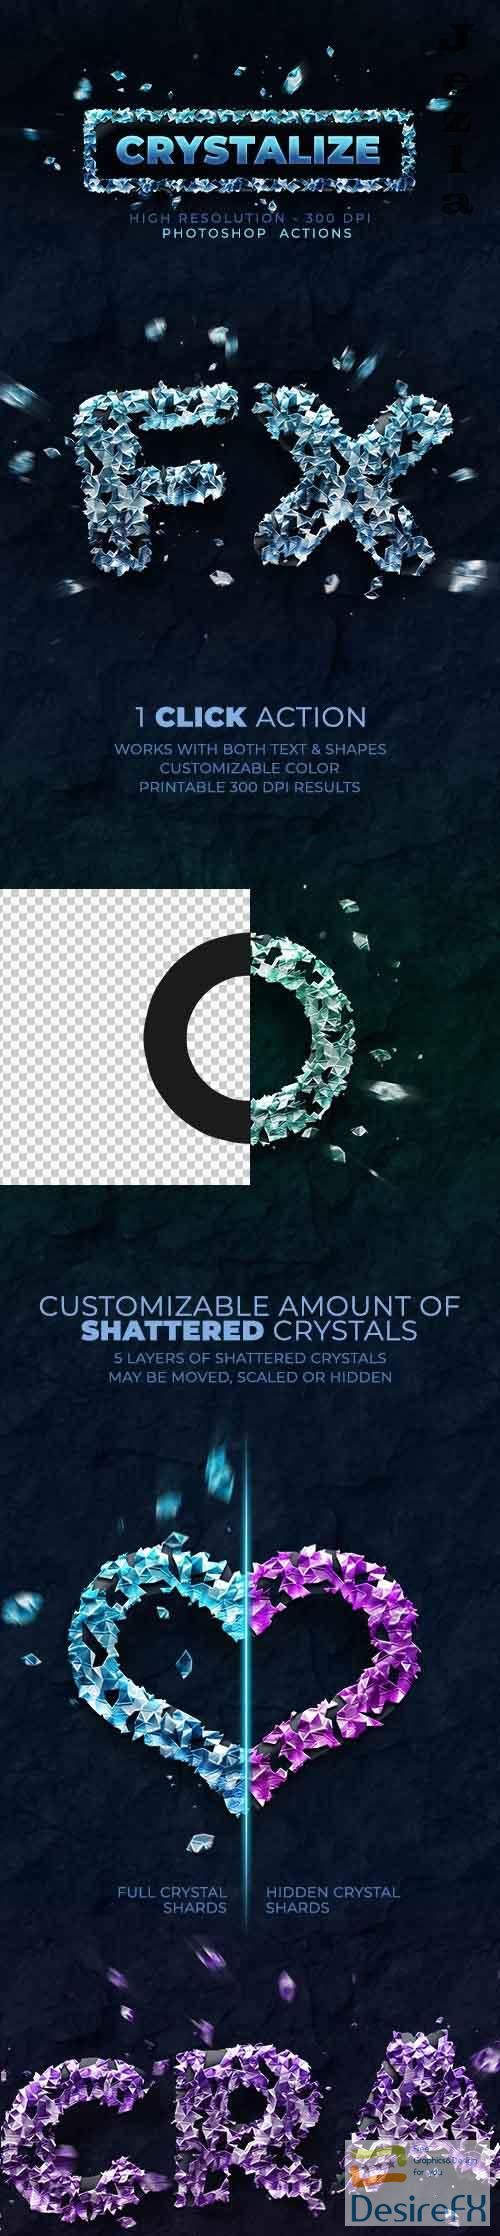 GraphicRiver - Crystalize - Photoshop Action - 300 DPI 28507917